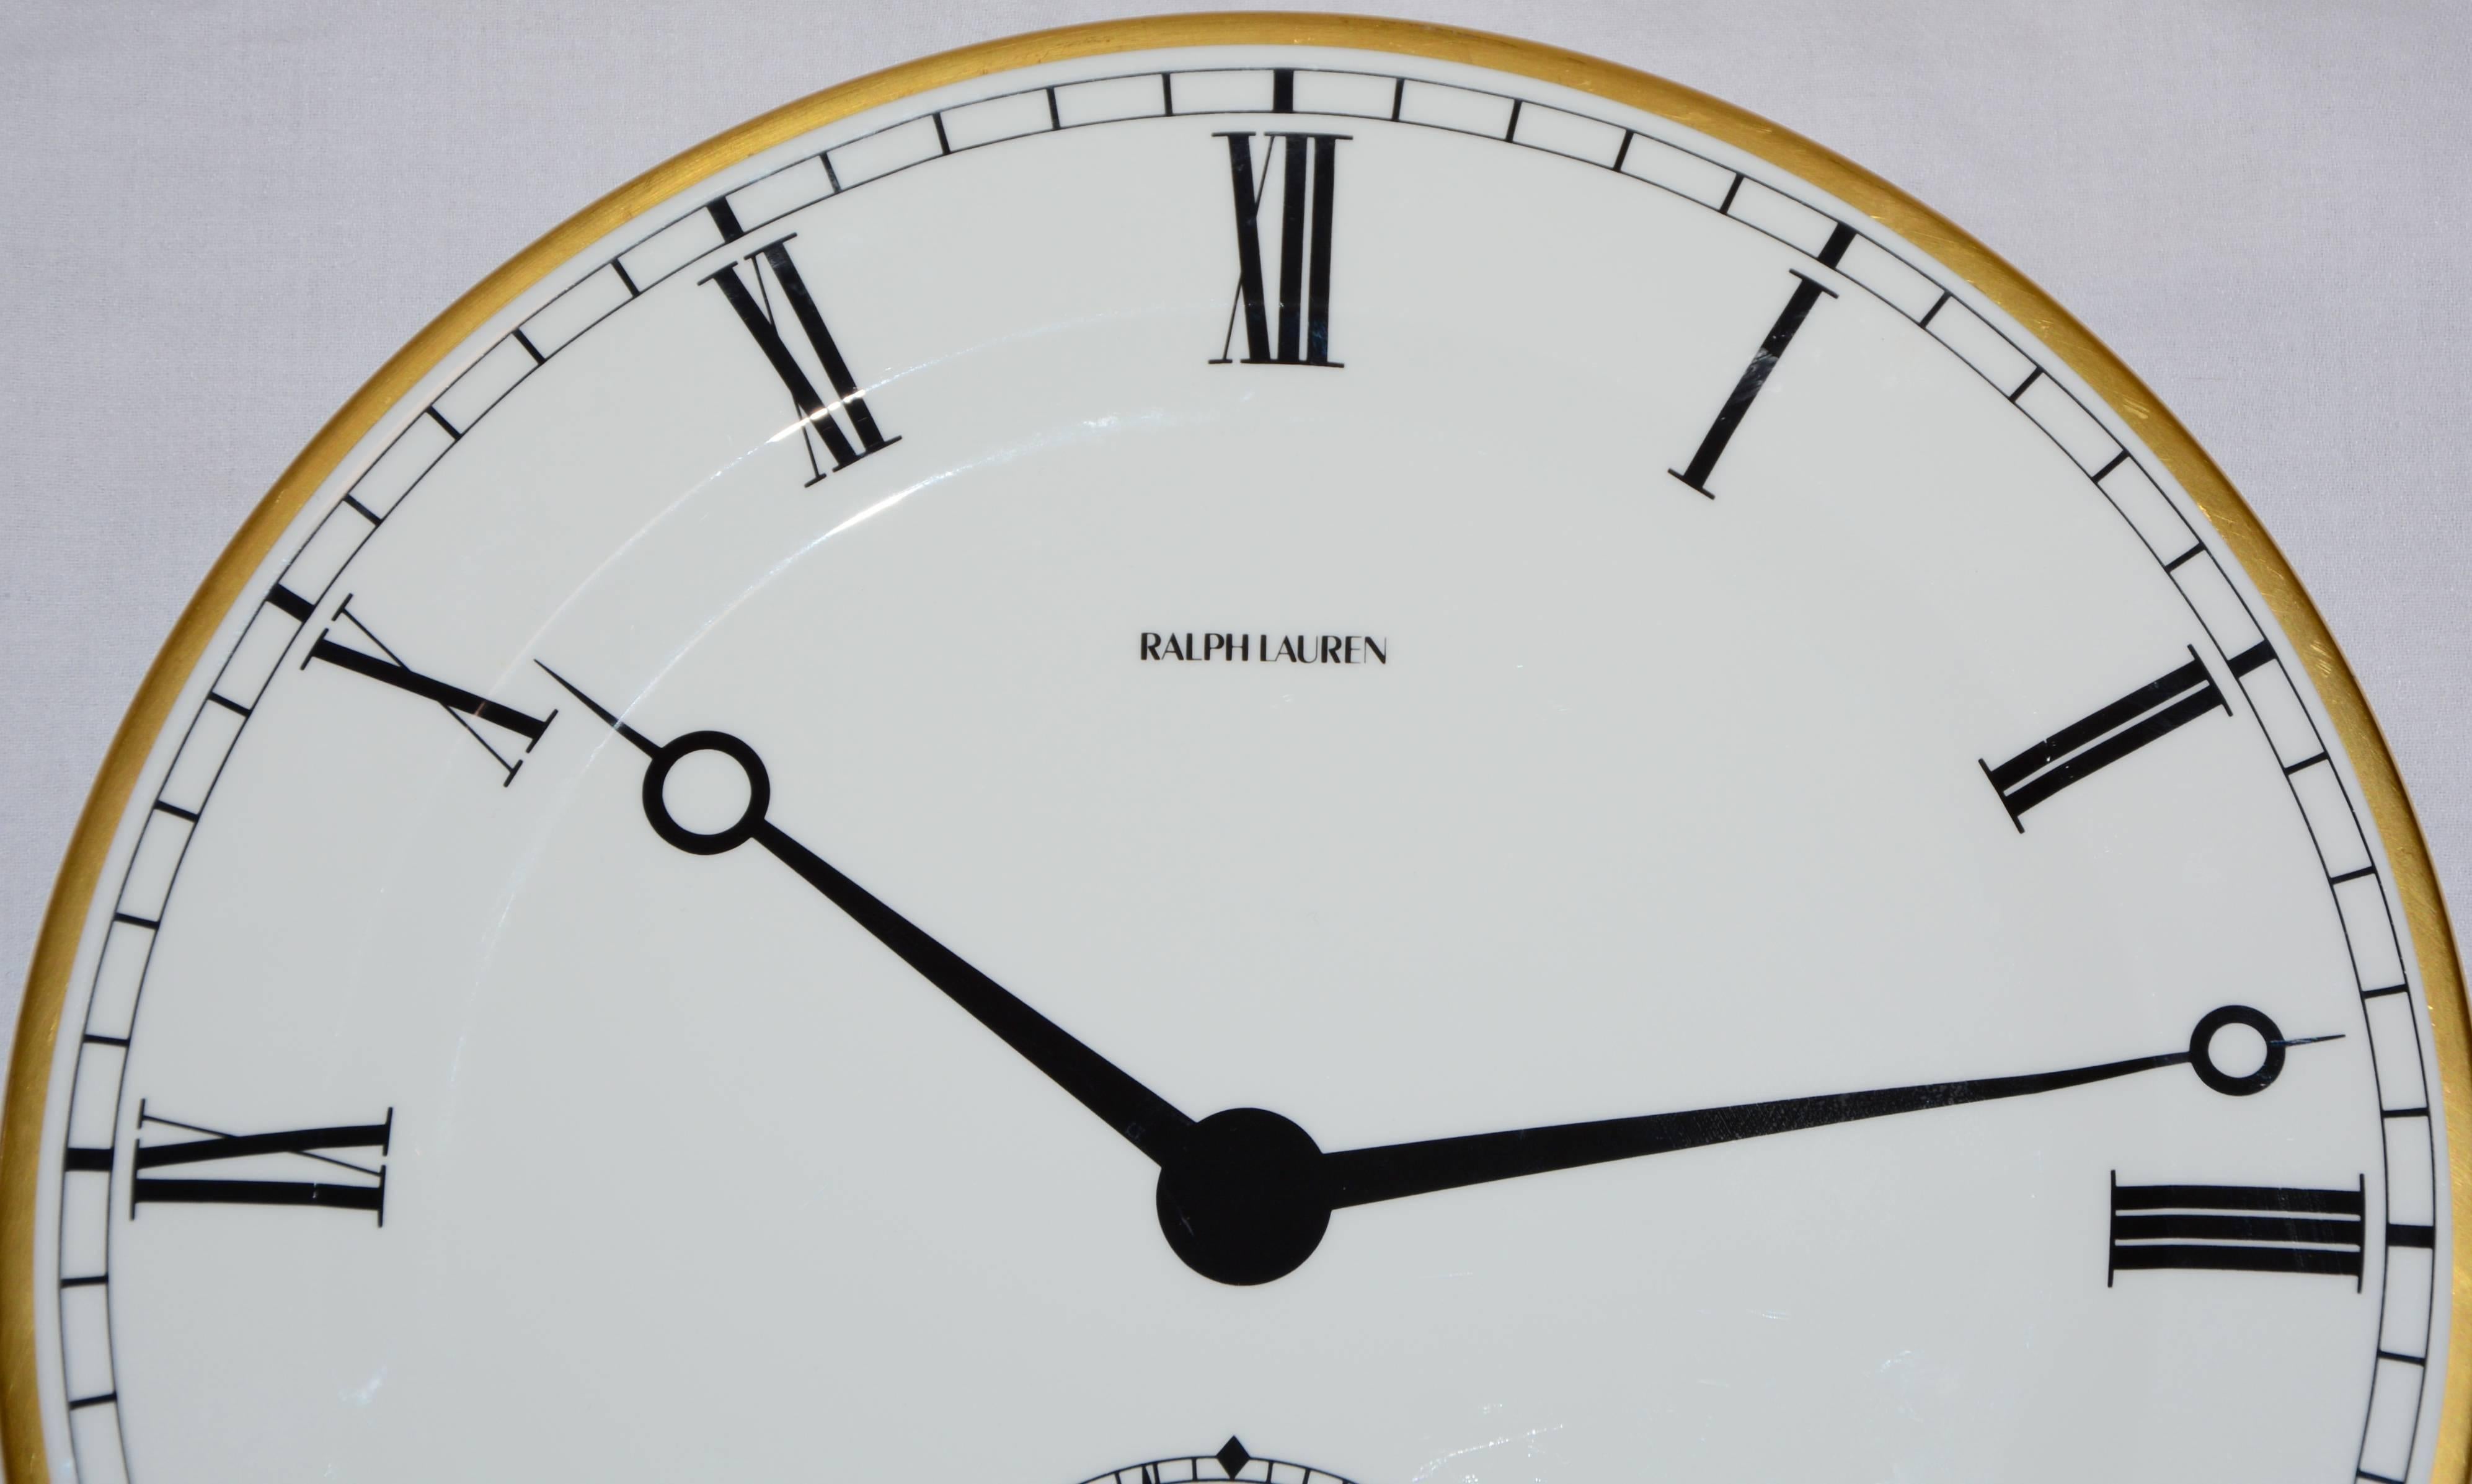 This listing features a sought after round white porcelain plate by Wedgwood for Ralph Lauren in the pocket watch pattern. This plate has a gold rim and is designed to look like the face of a watch with ebony black hands and Roman numeral markers.